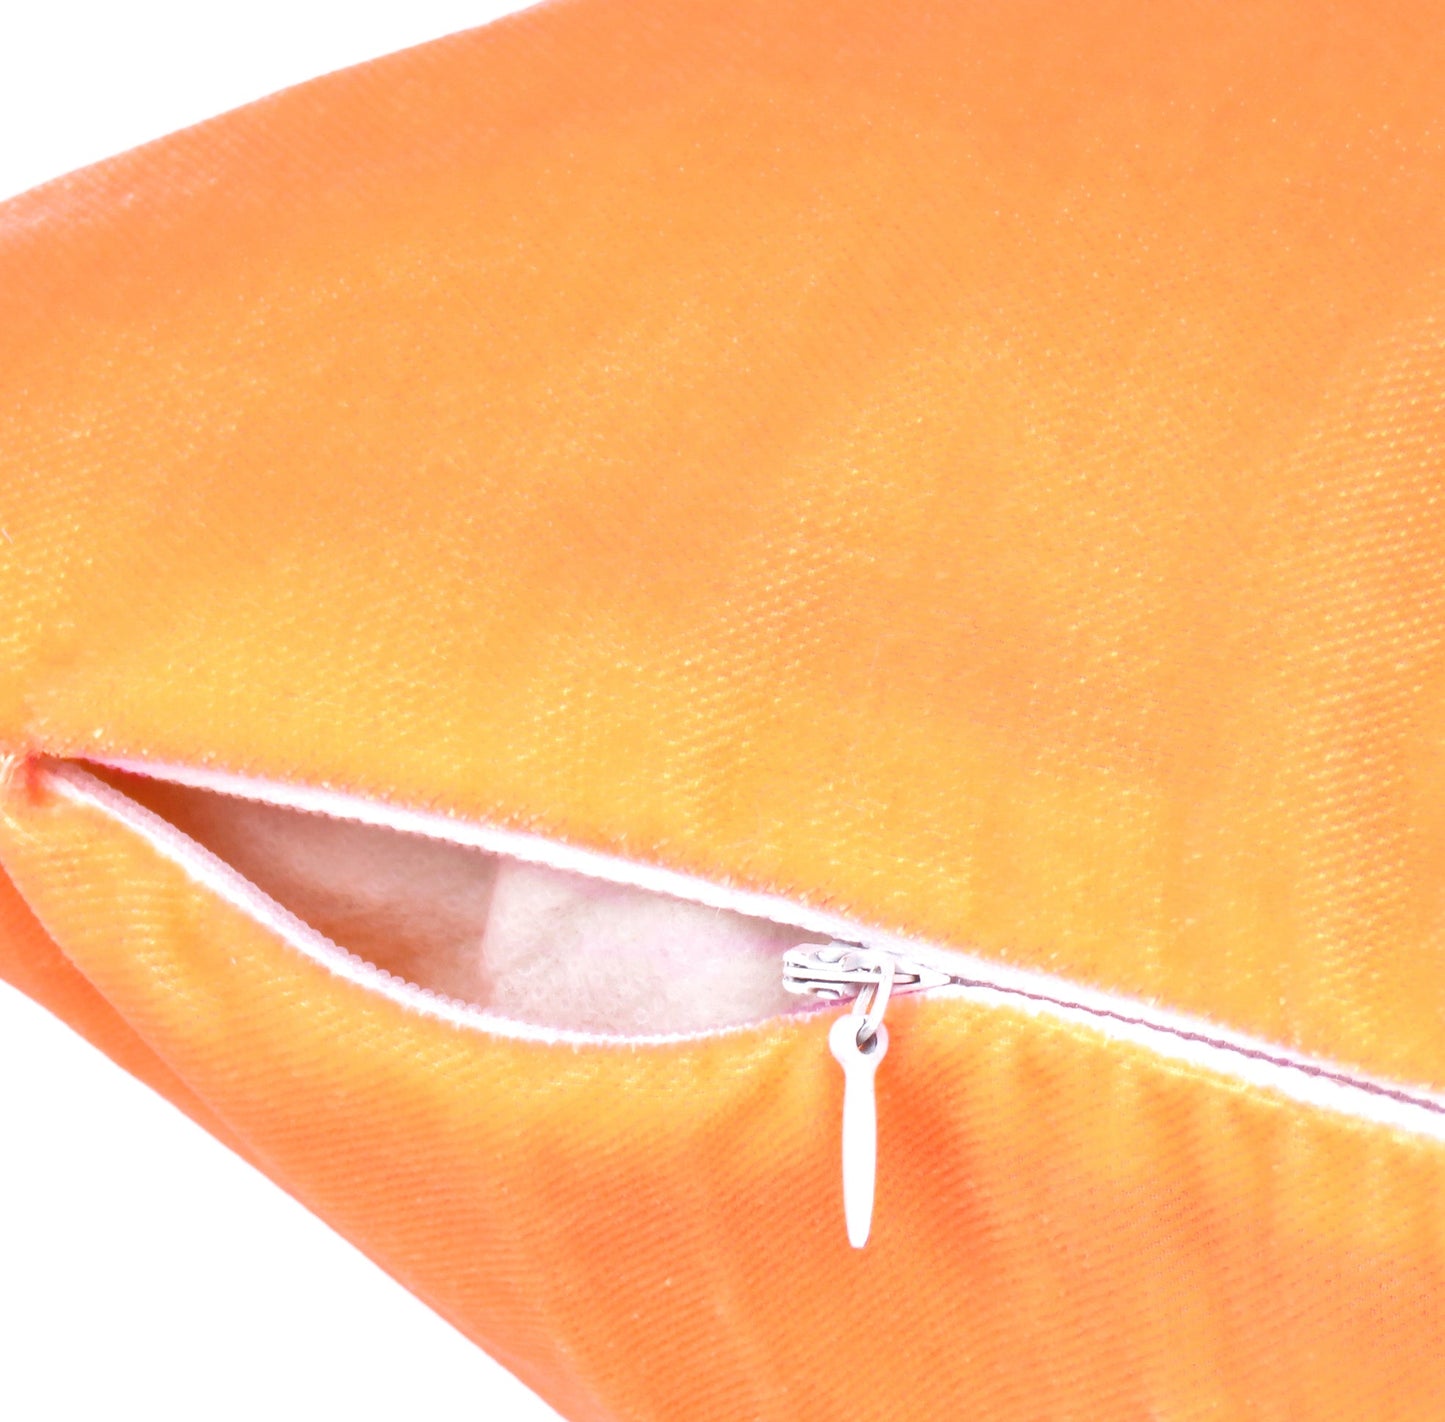 Solid Velvet Cushion Cover with Purple Piping Edge in Set of 2 - Orange